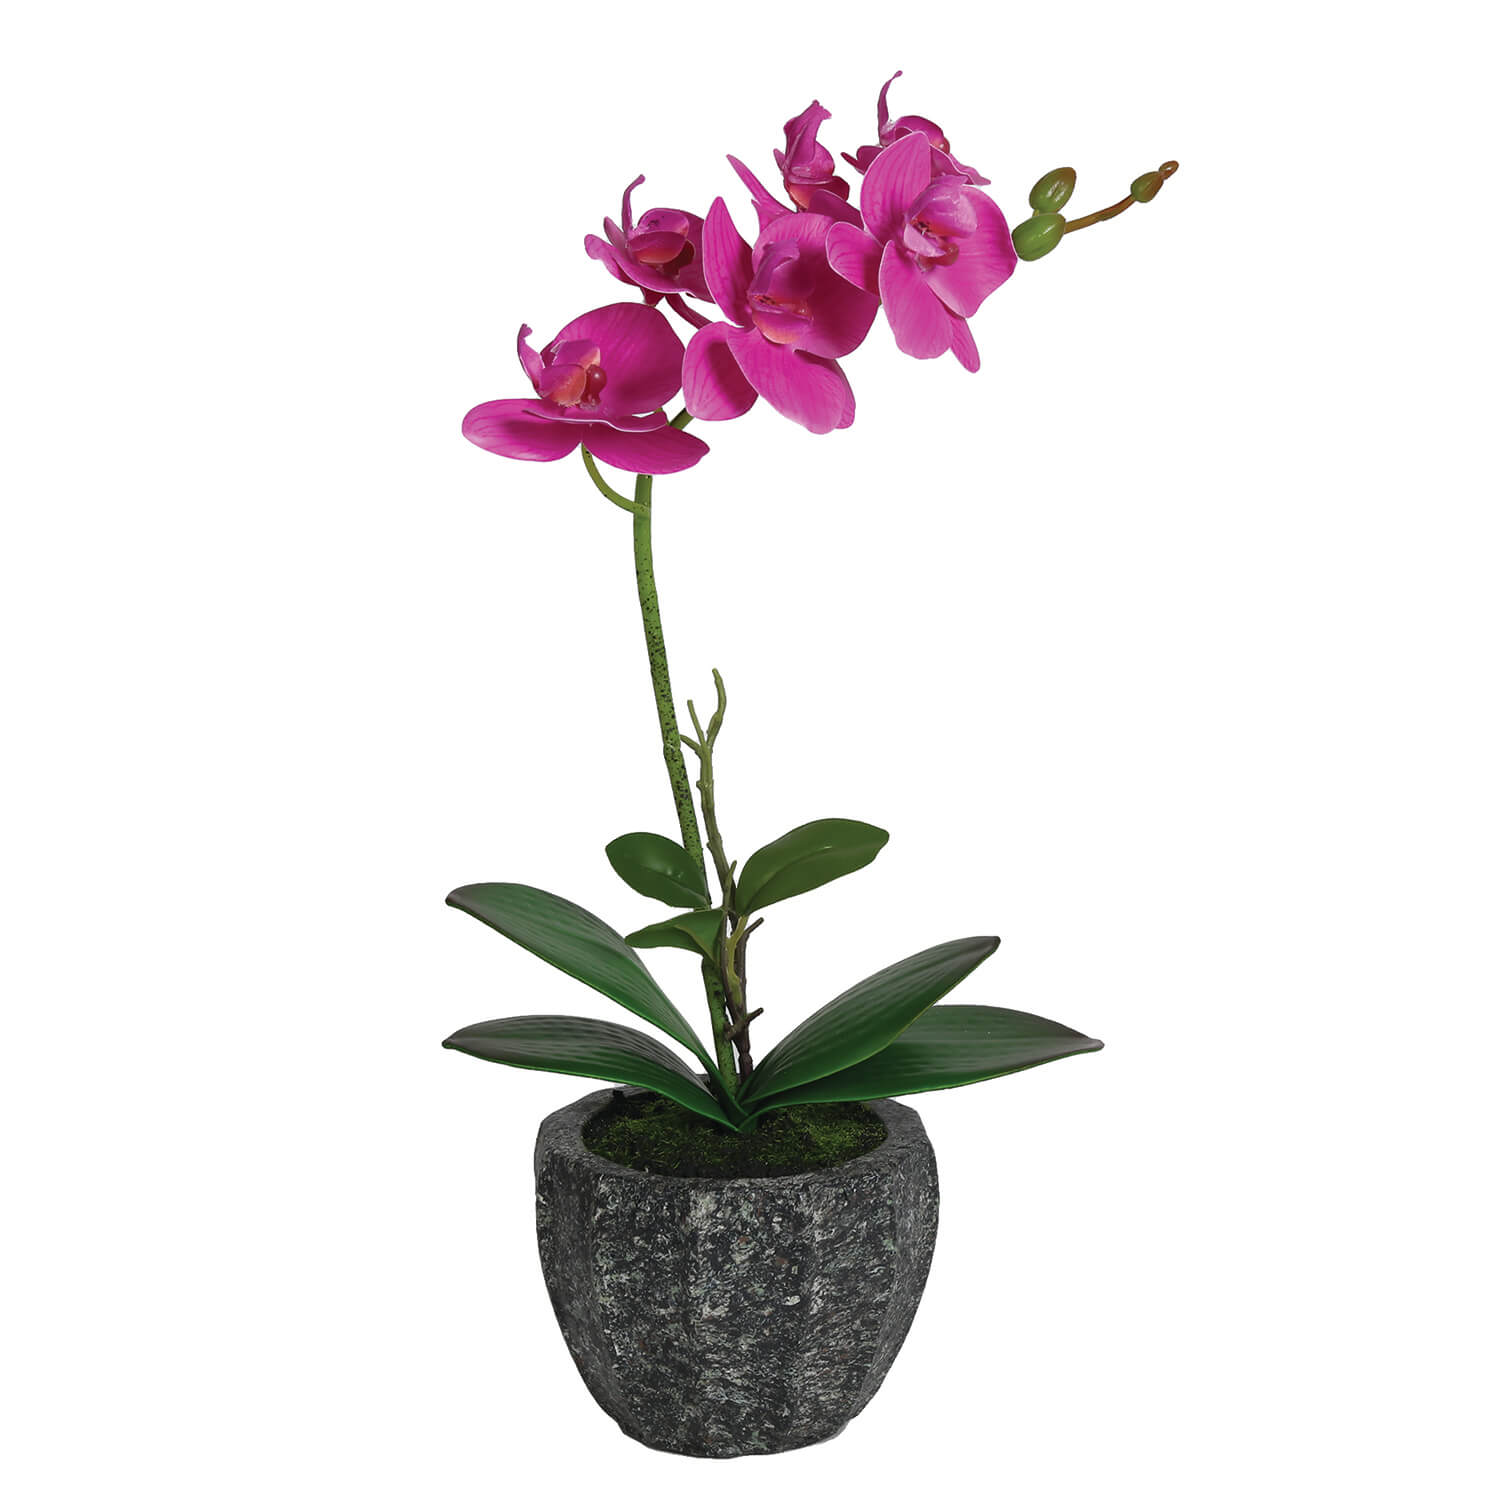 The Home Collection Orchid 38cm - Pink 1 Shaws Department Stores